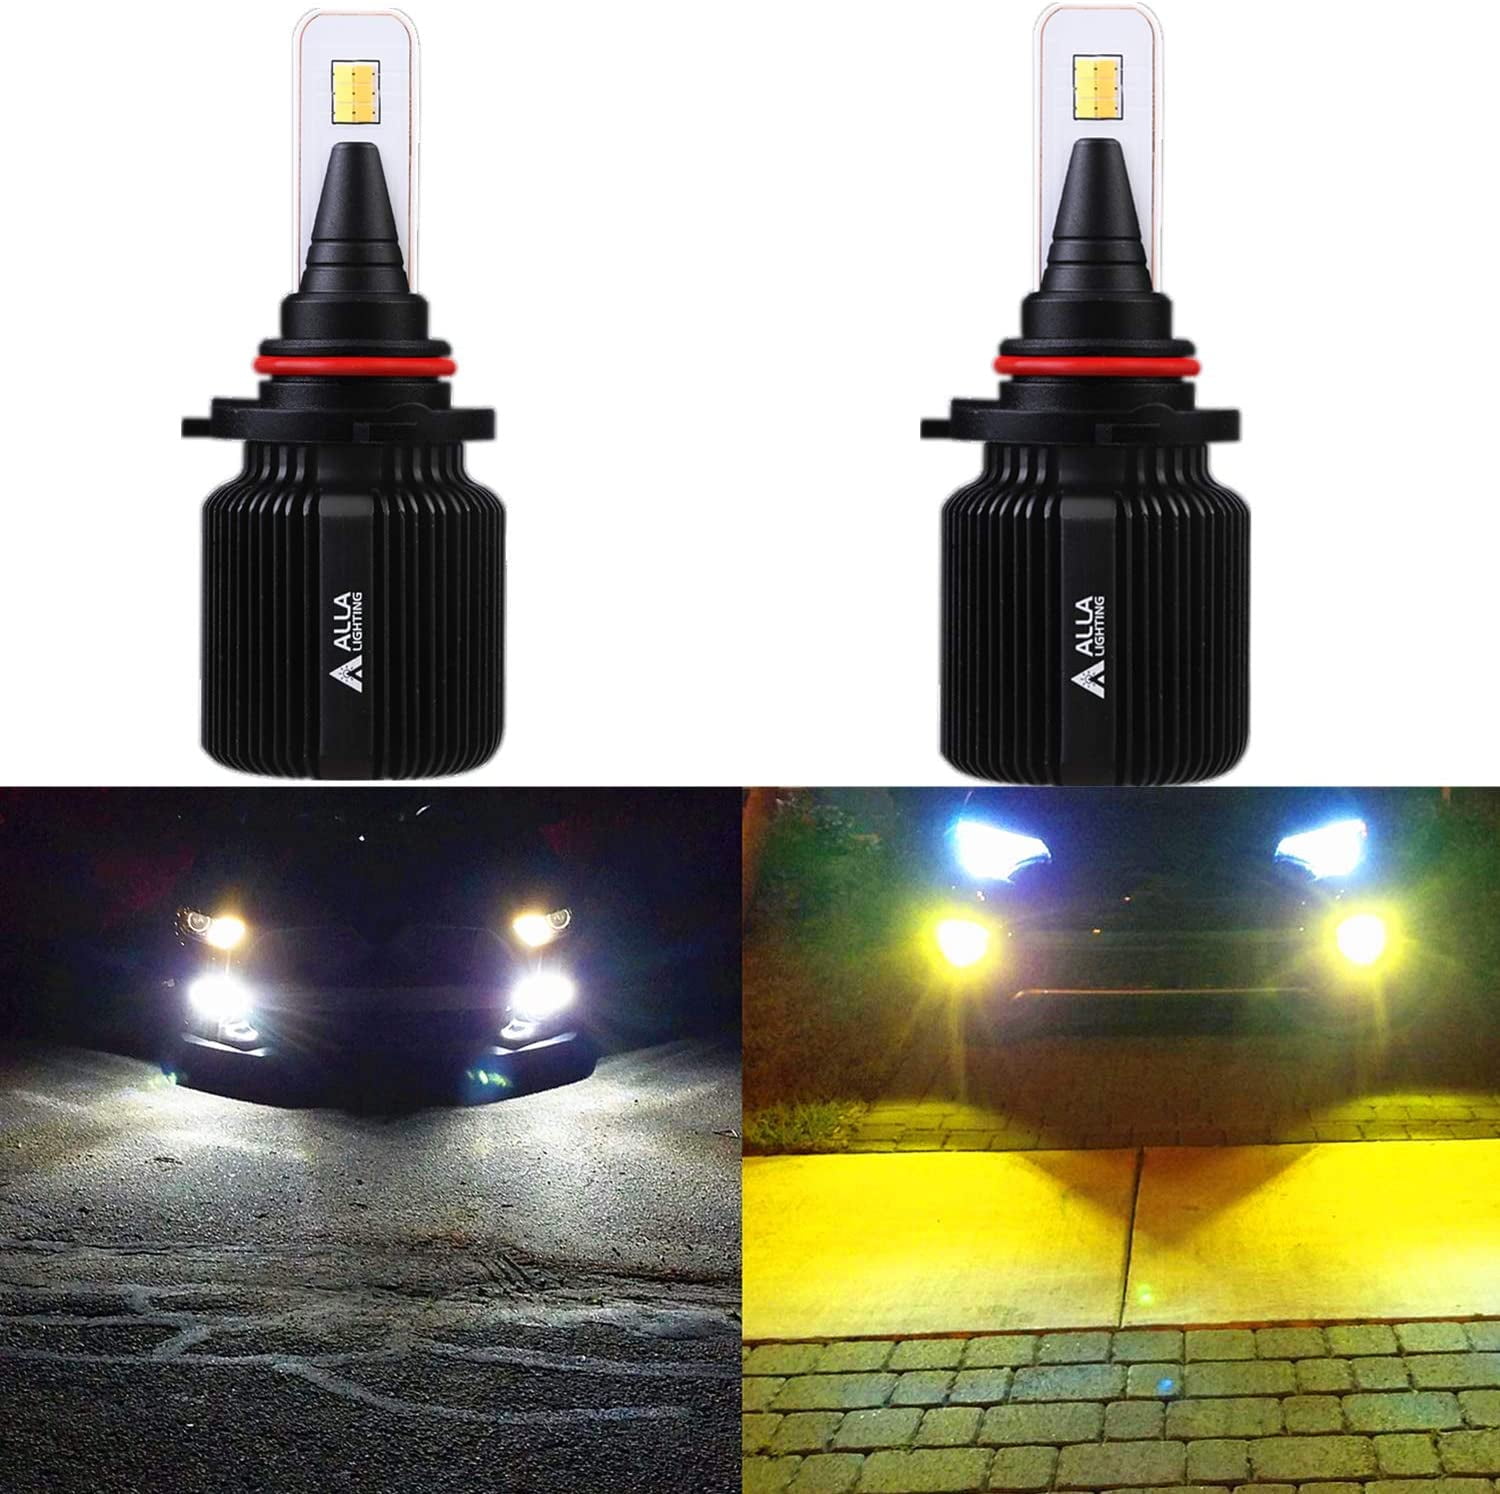 AUXITO H10 9145 9140 2600LM 55W LED Fog Light Bulb 6000K HID White Driving Lamp 